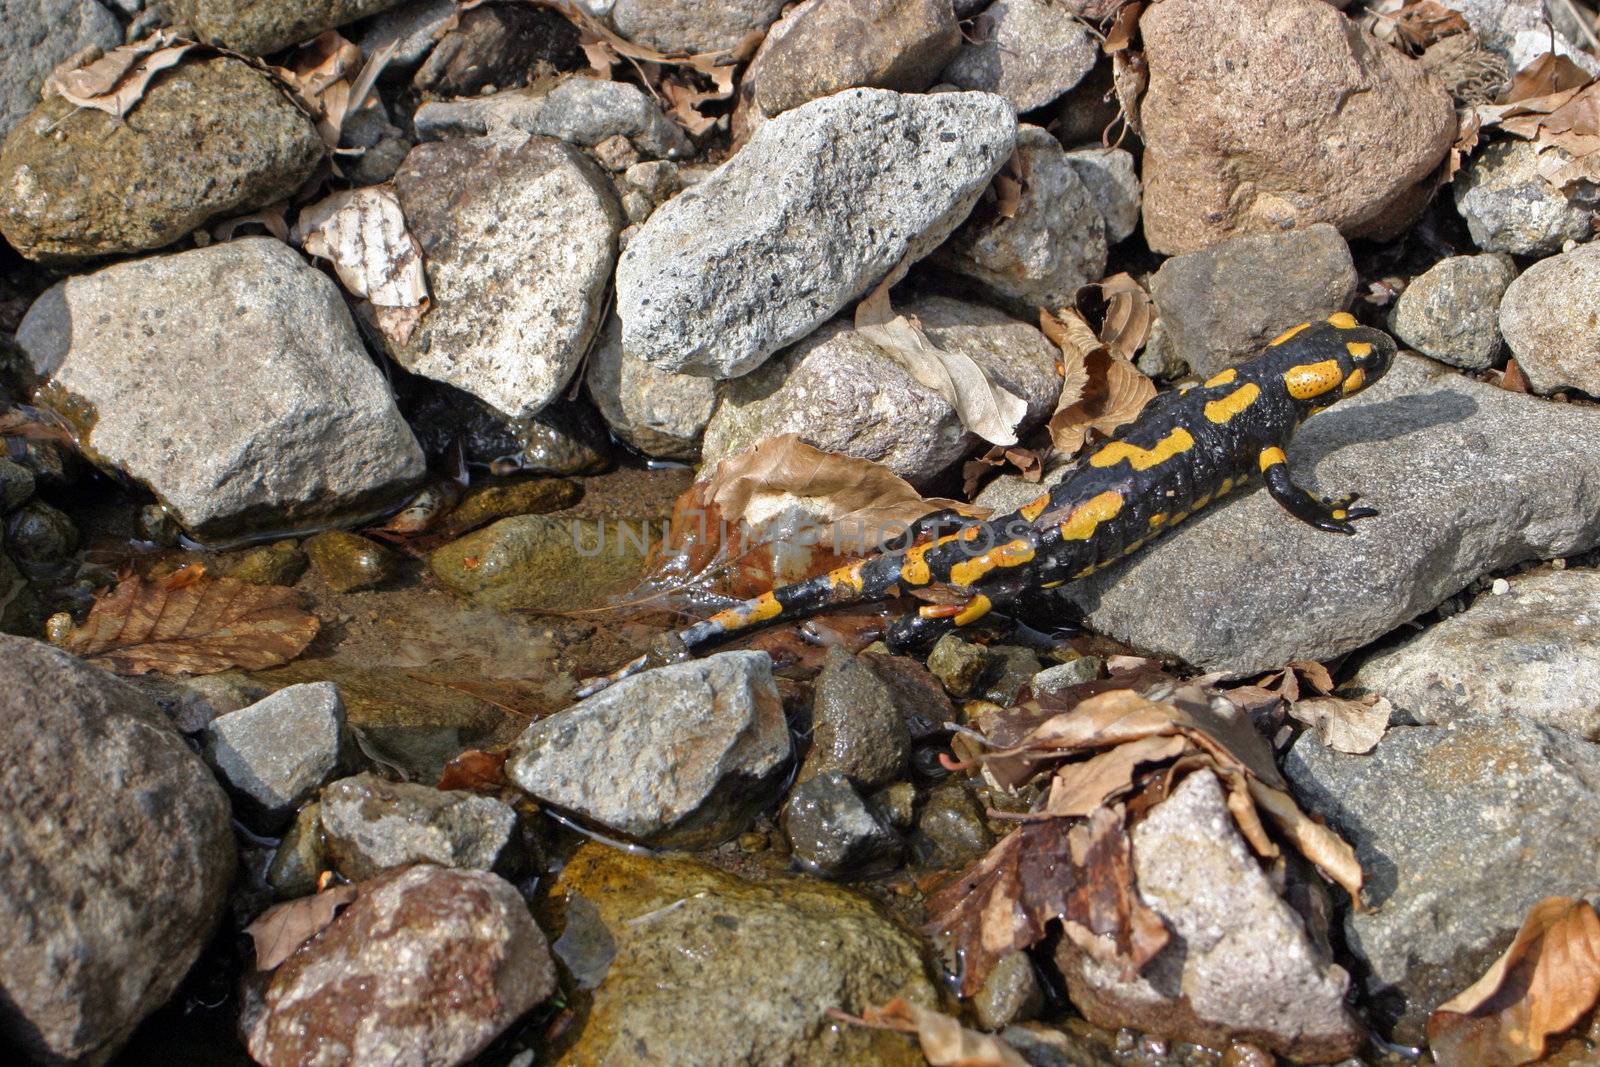 Spotty salamander is climbing out of the water